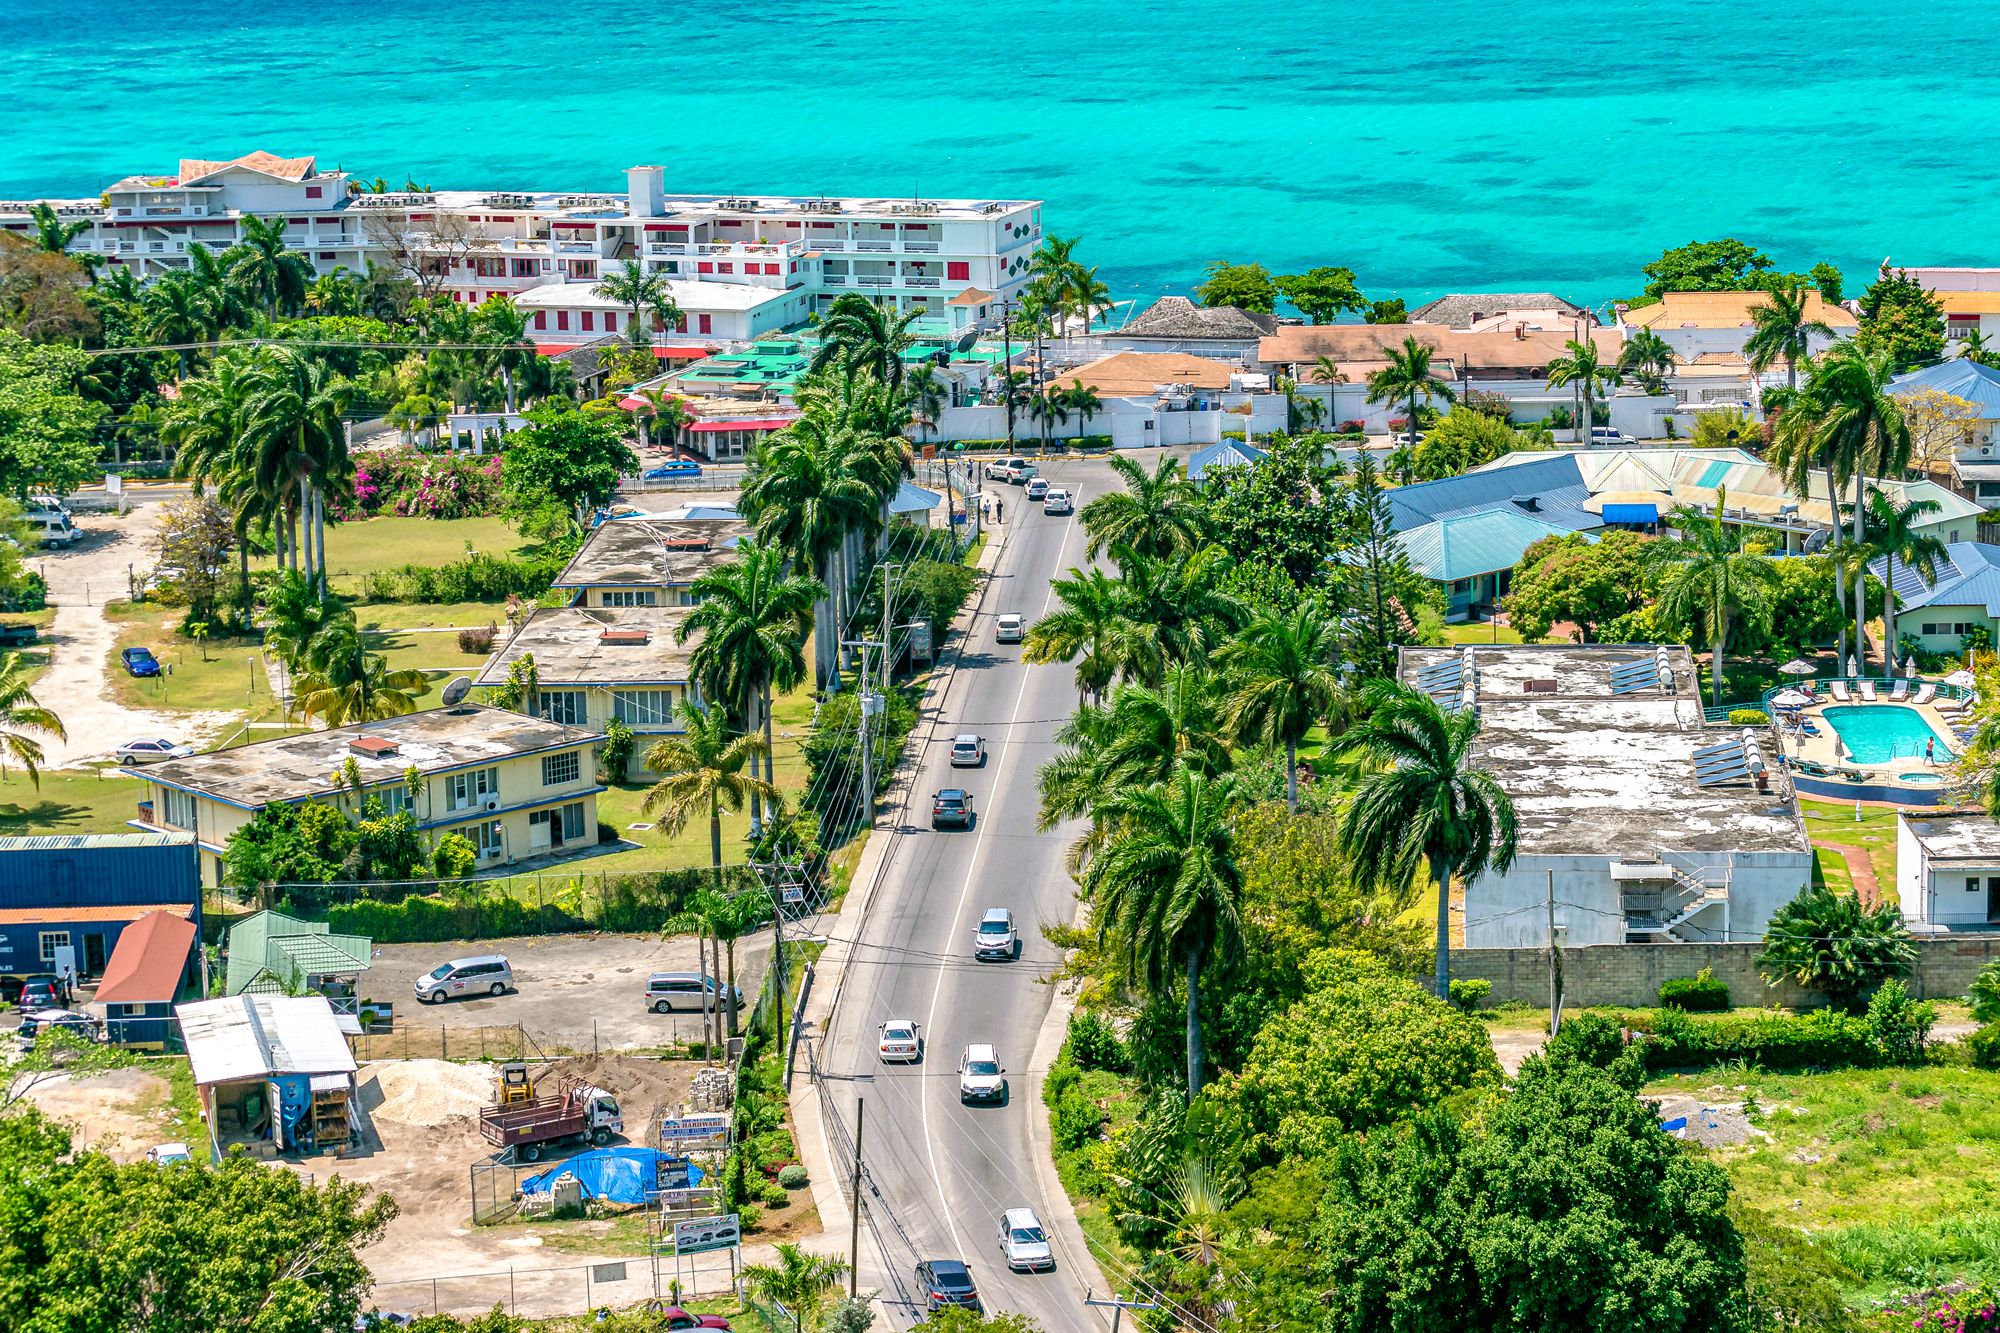 28 Helpful Travel Tips For Jamaica, Dos & Don'ts